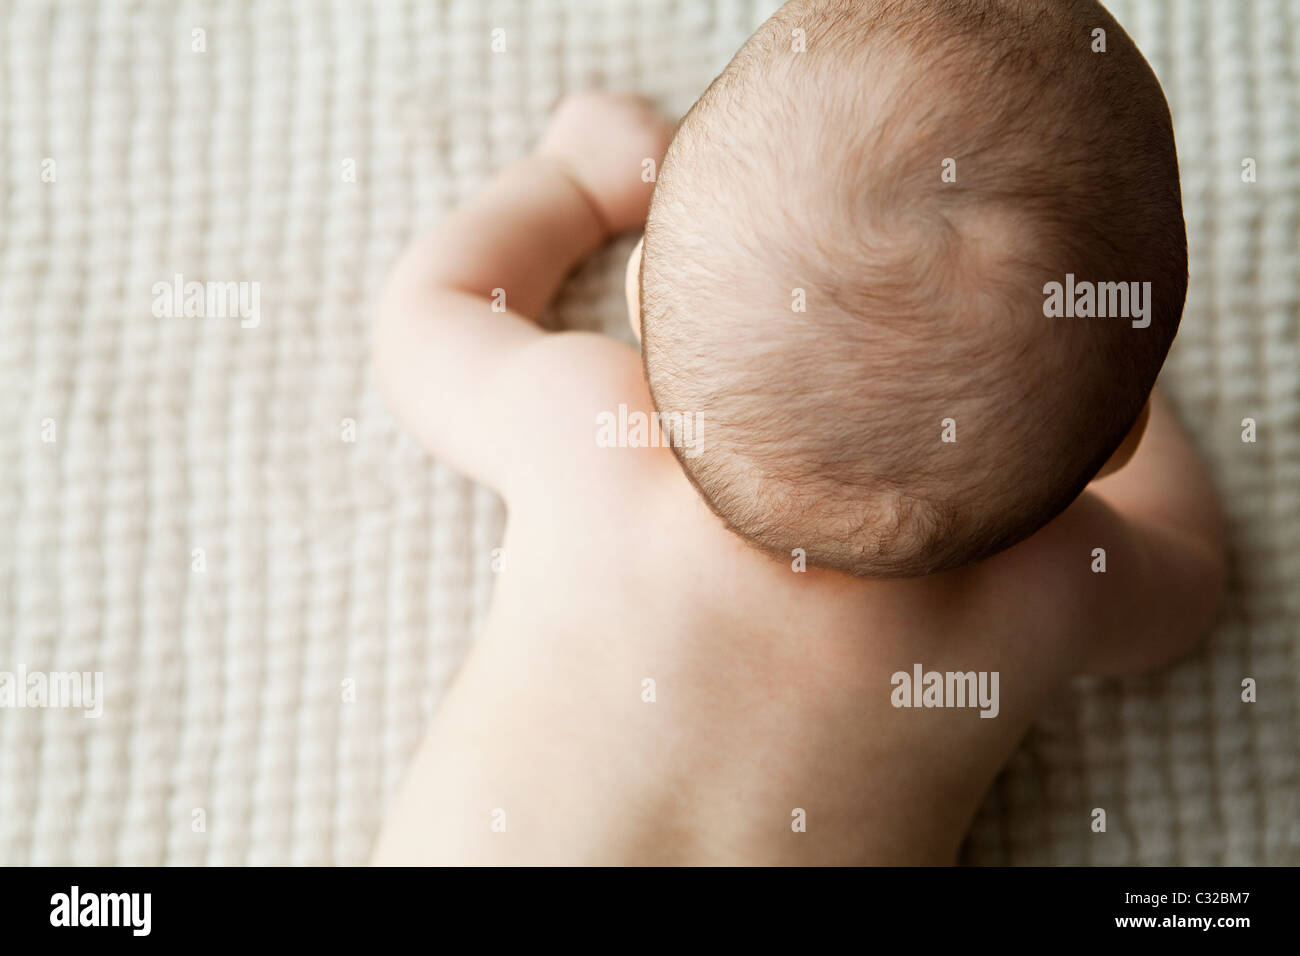 Elevated view of baby boy's head Stock Photo